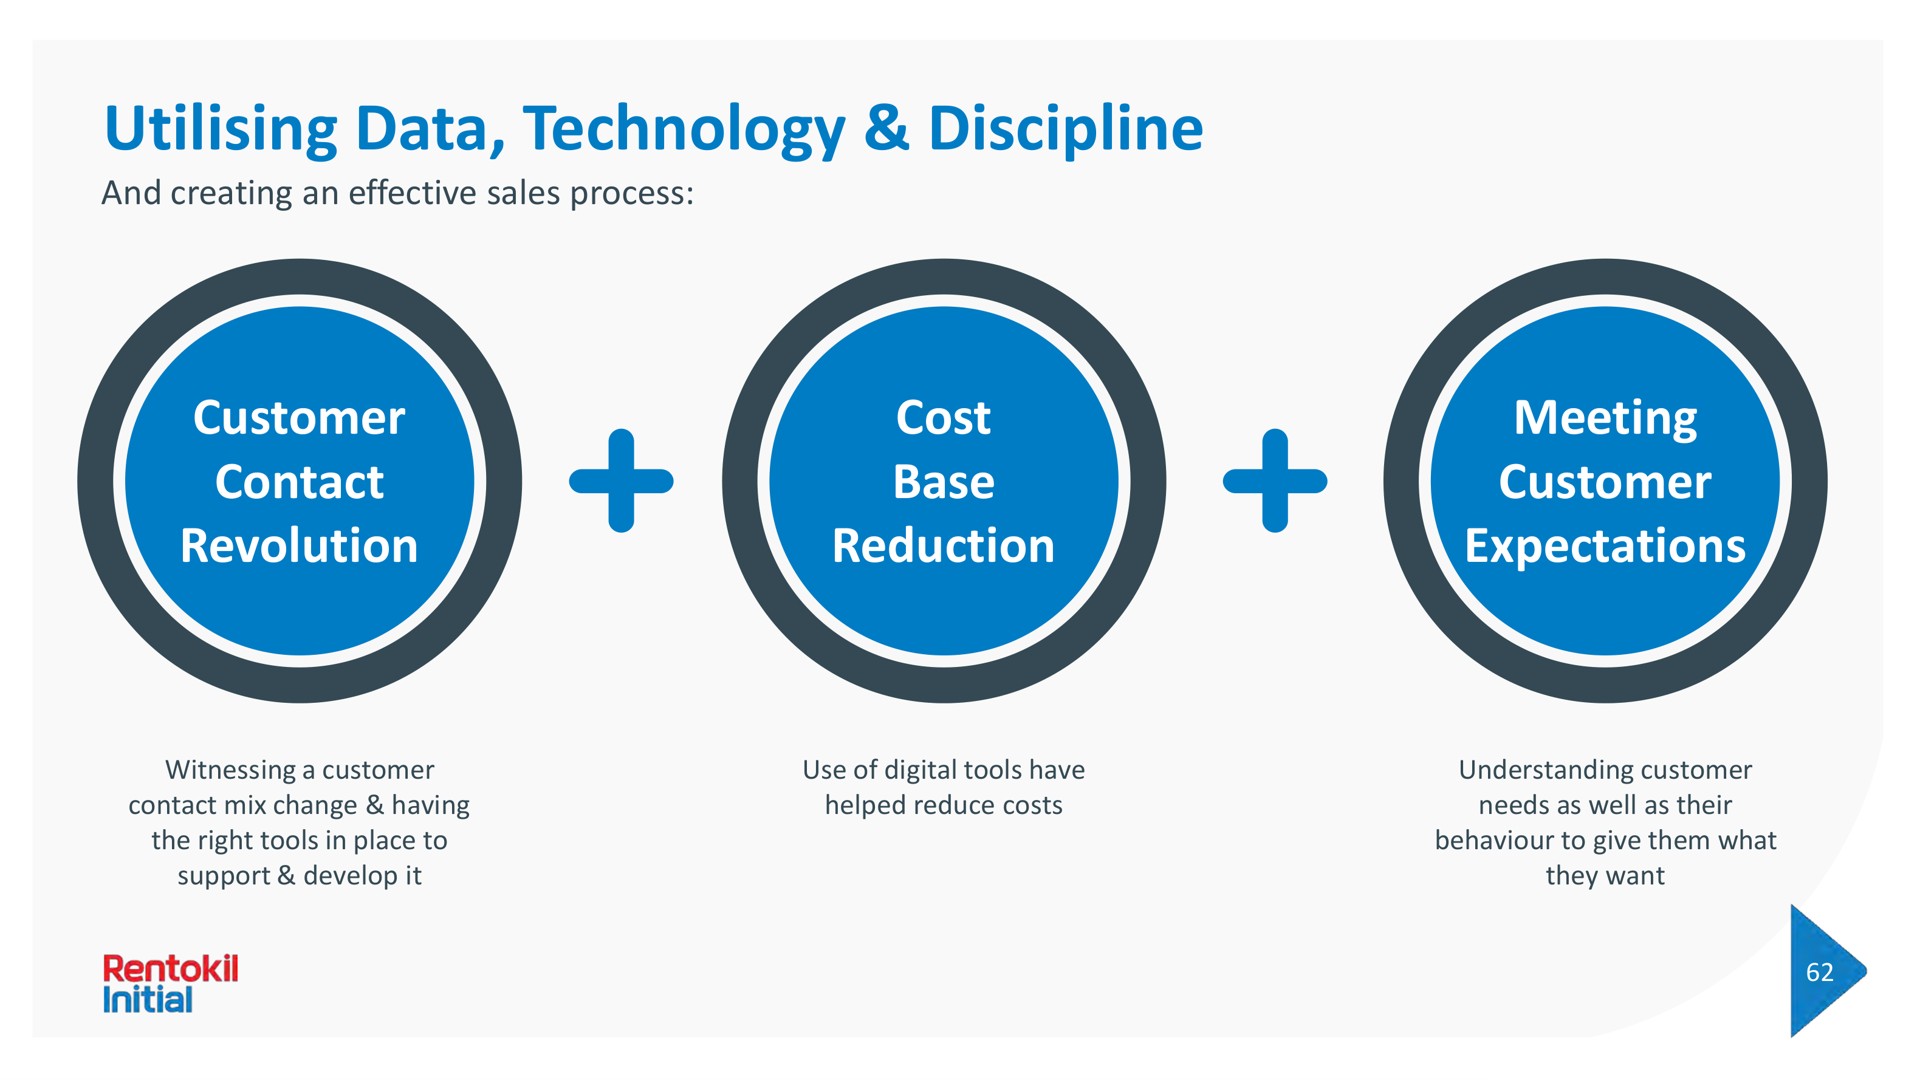 data technology discipline and creating an effective sales process customer contact revolution cost base reduction meeting customer expectations | Rentokil Initial